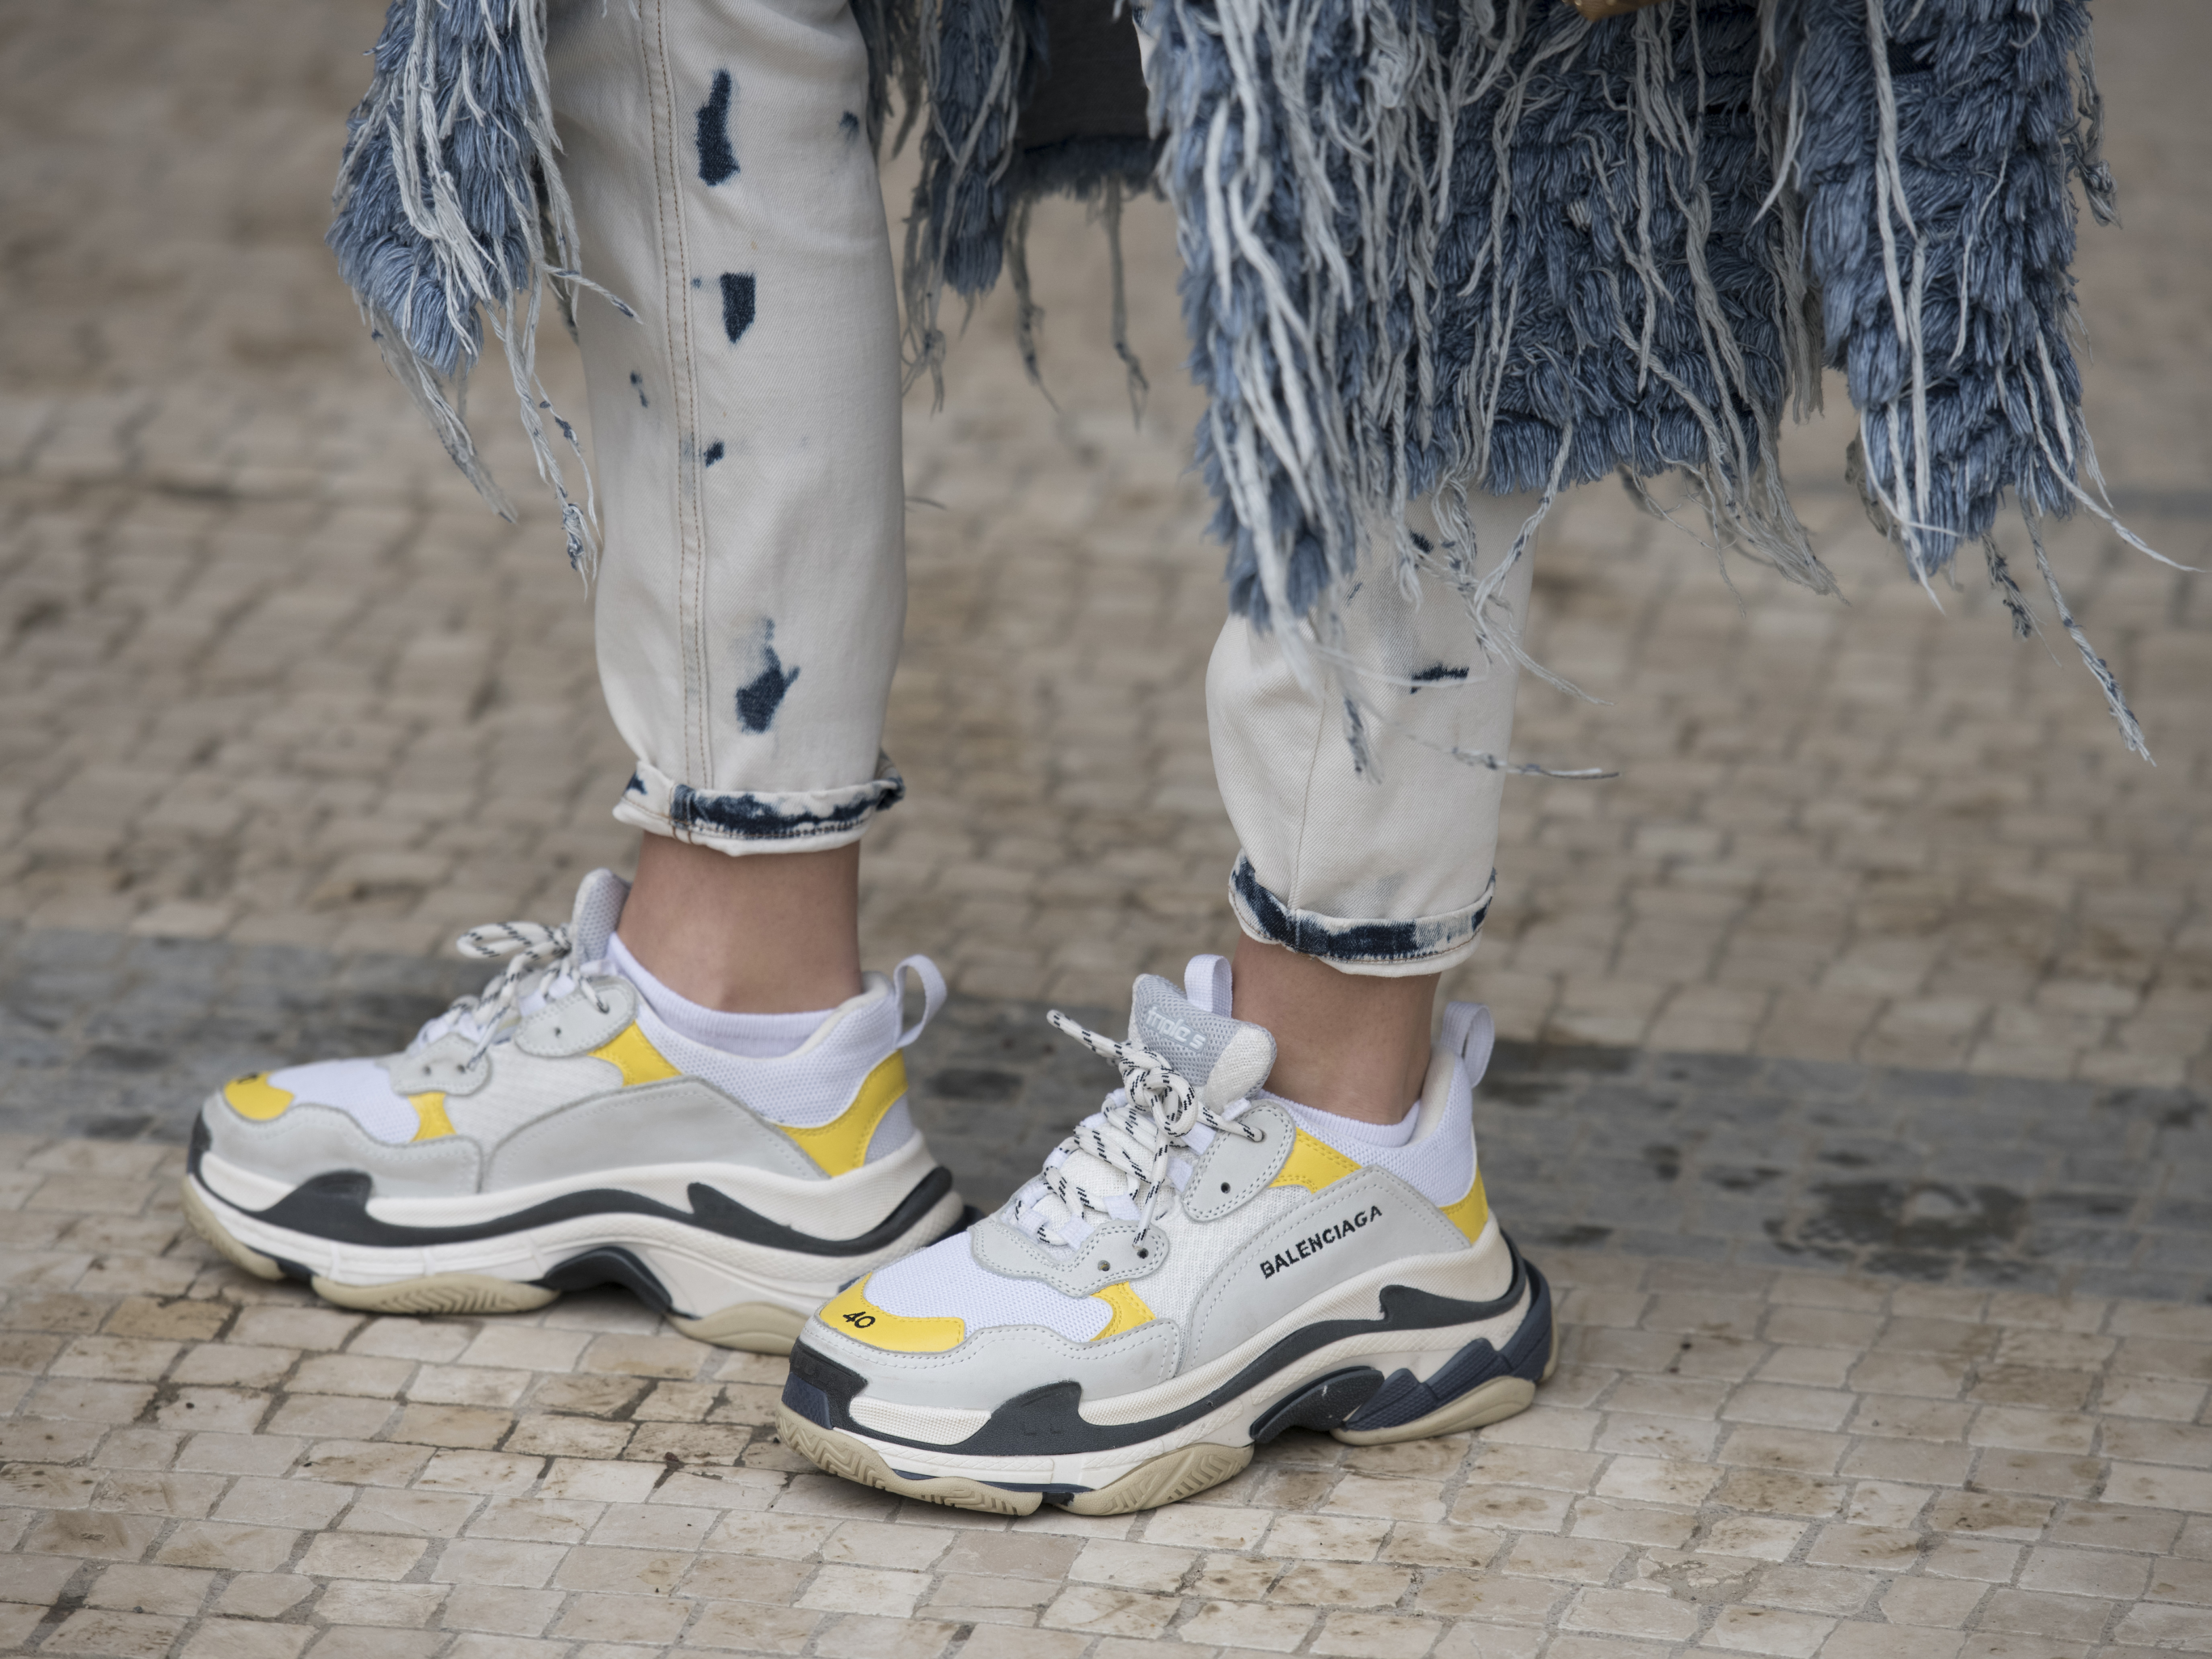 Paul Warmer bv  WIN WIN WIN FOR ALL THE MEN  Want to win these Balenciaga  Triple S sneakers Check out paulwarmerdenhaag how to participate  giveaway paulwarmerdenhaag  Facebook